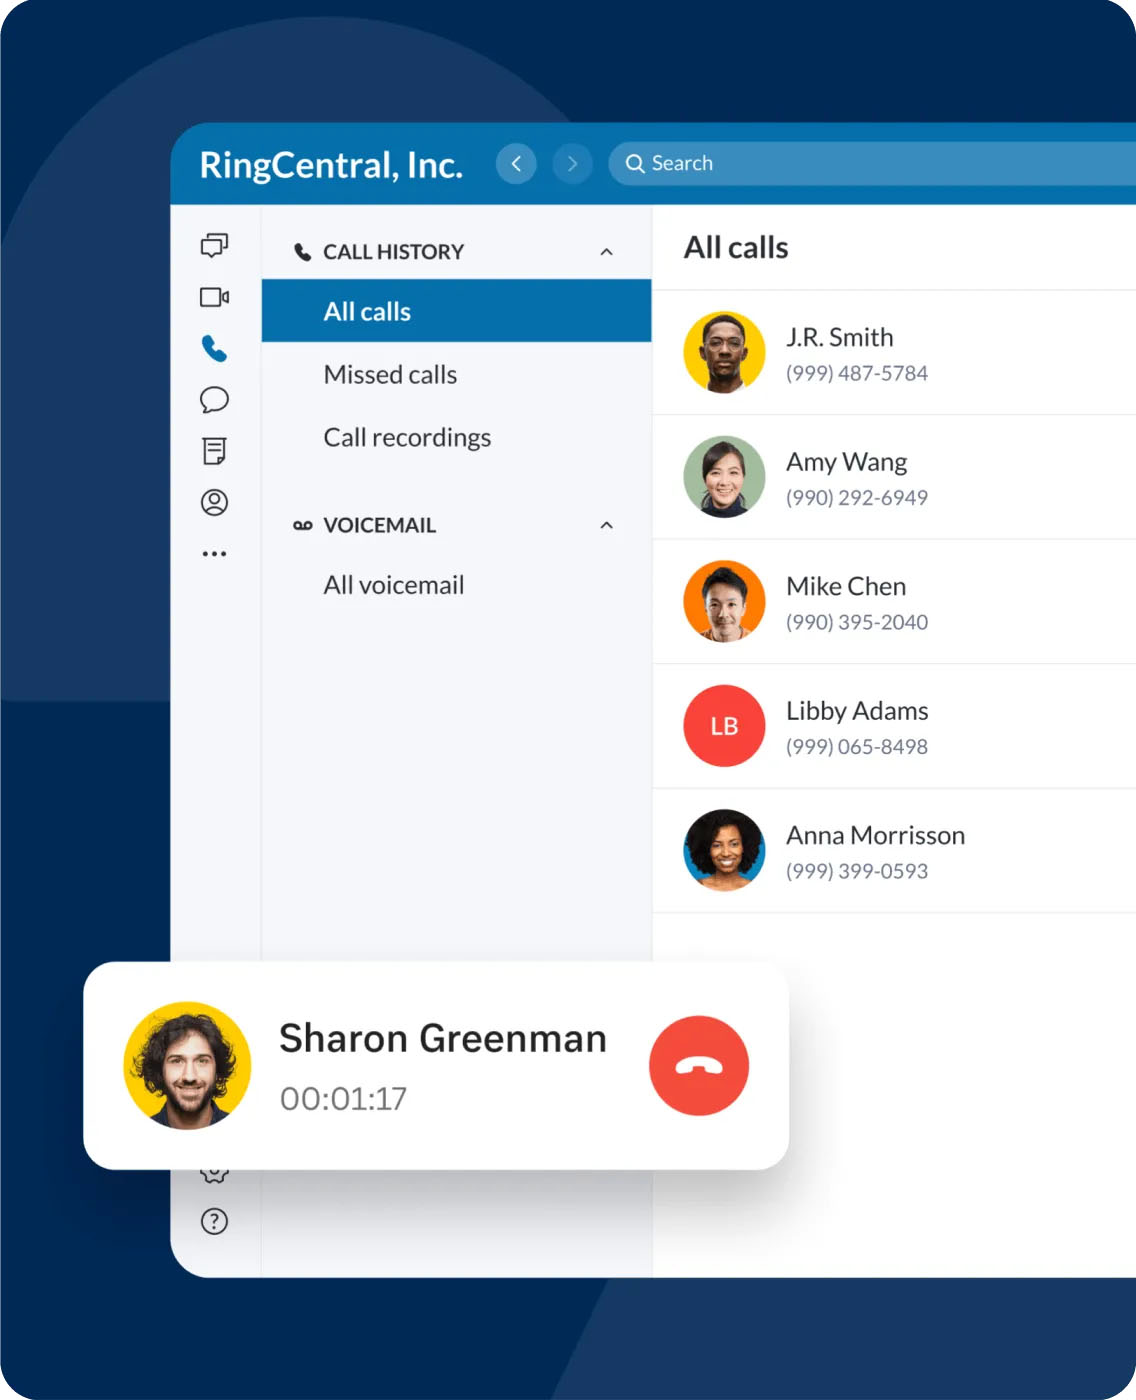 RingCentral's softphone application interface.